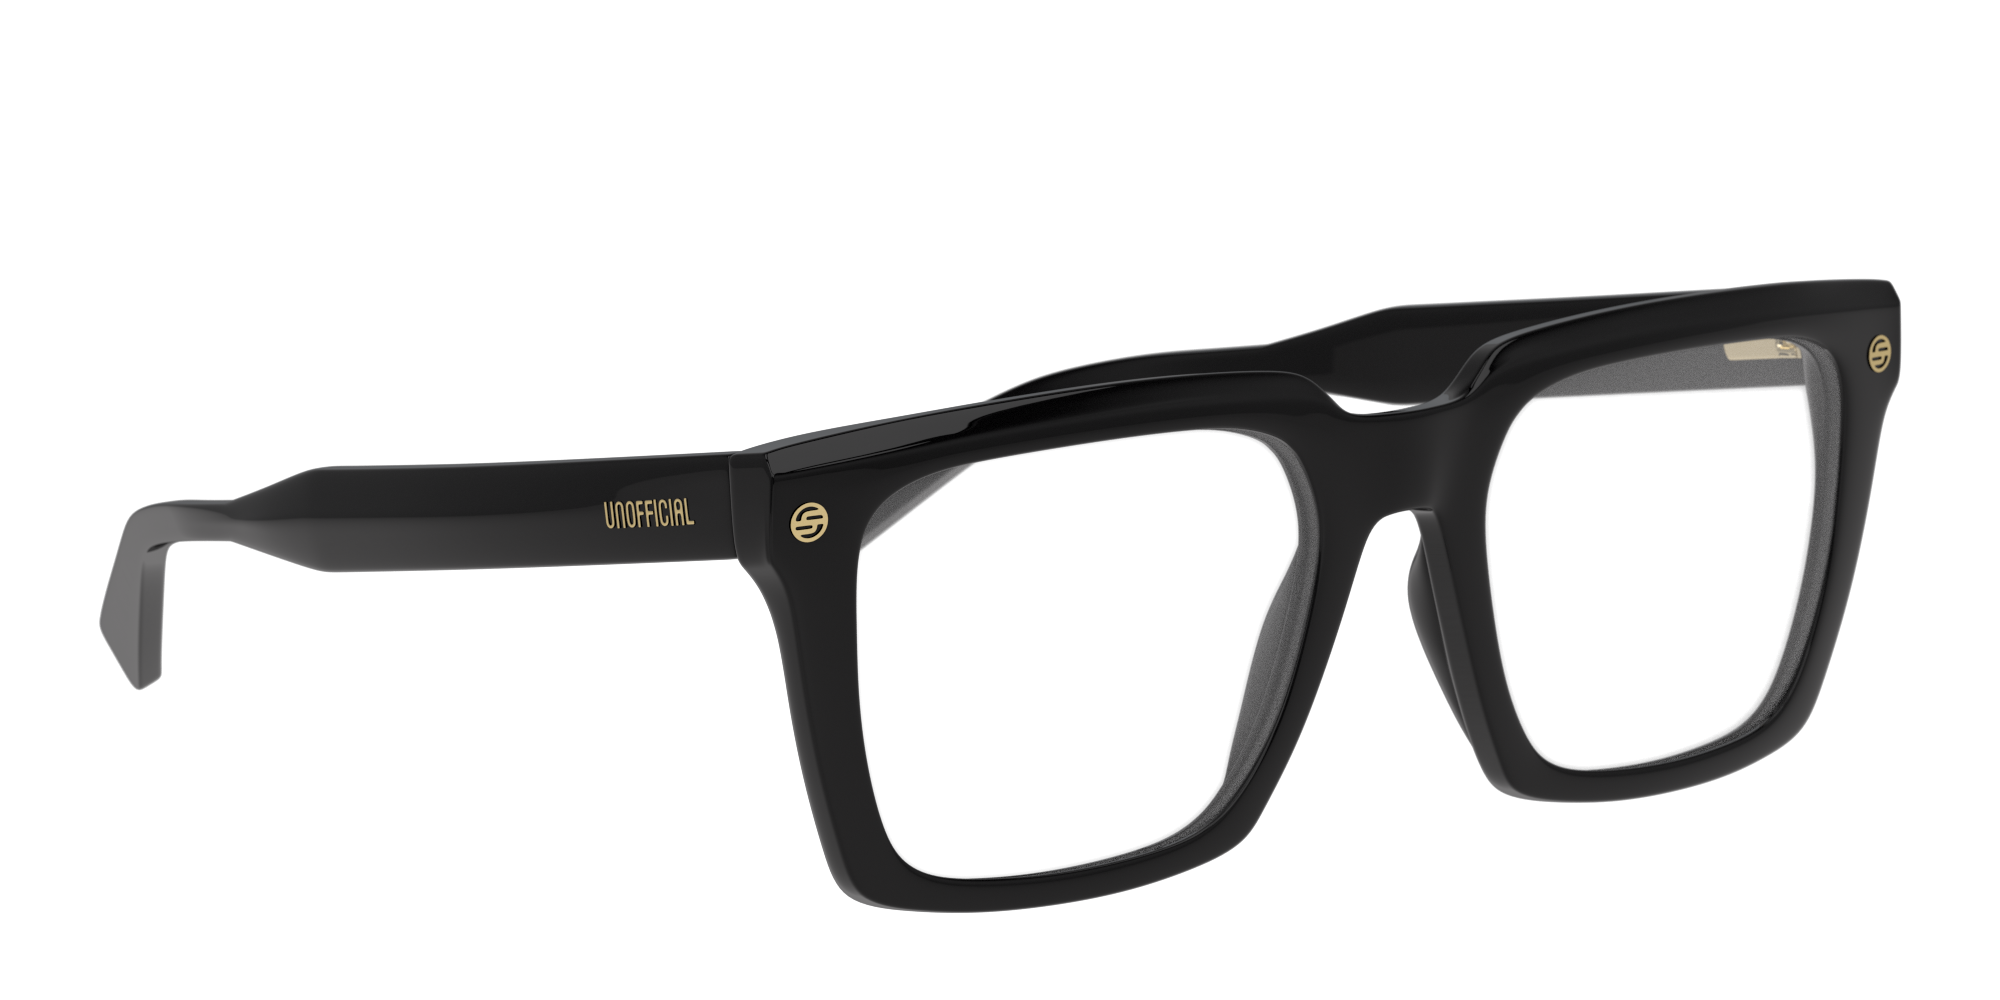 Angle_Right01 Unofficial UO2159 Glasses Transparent / Black